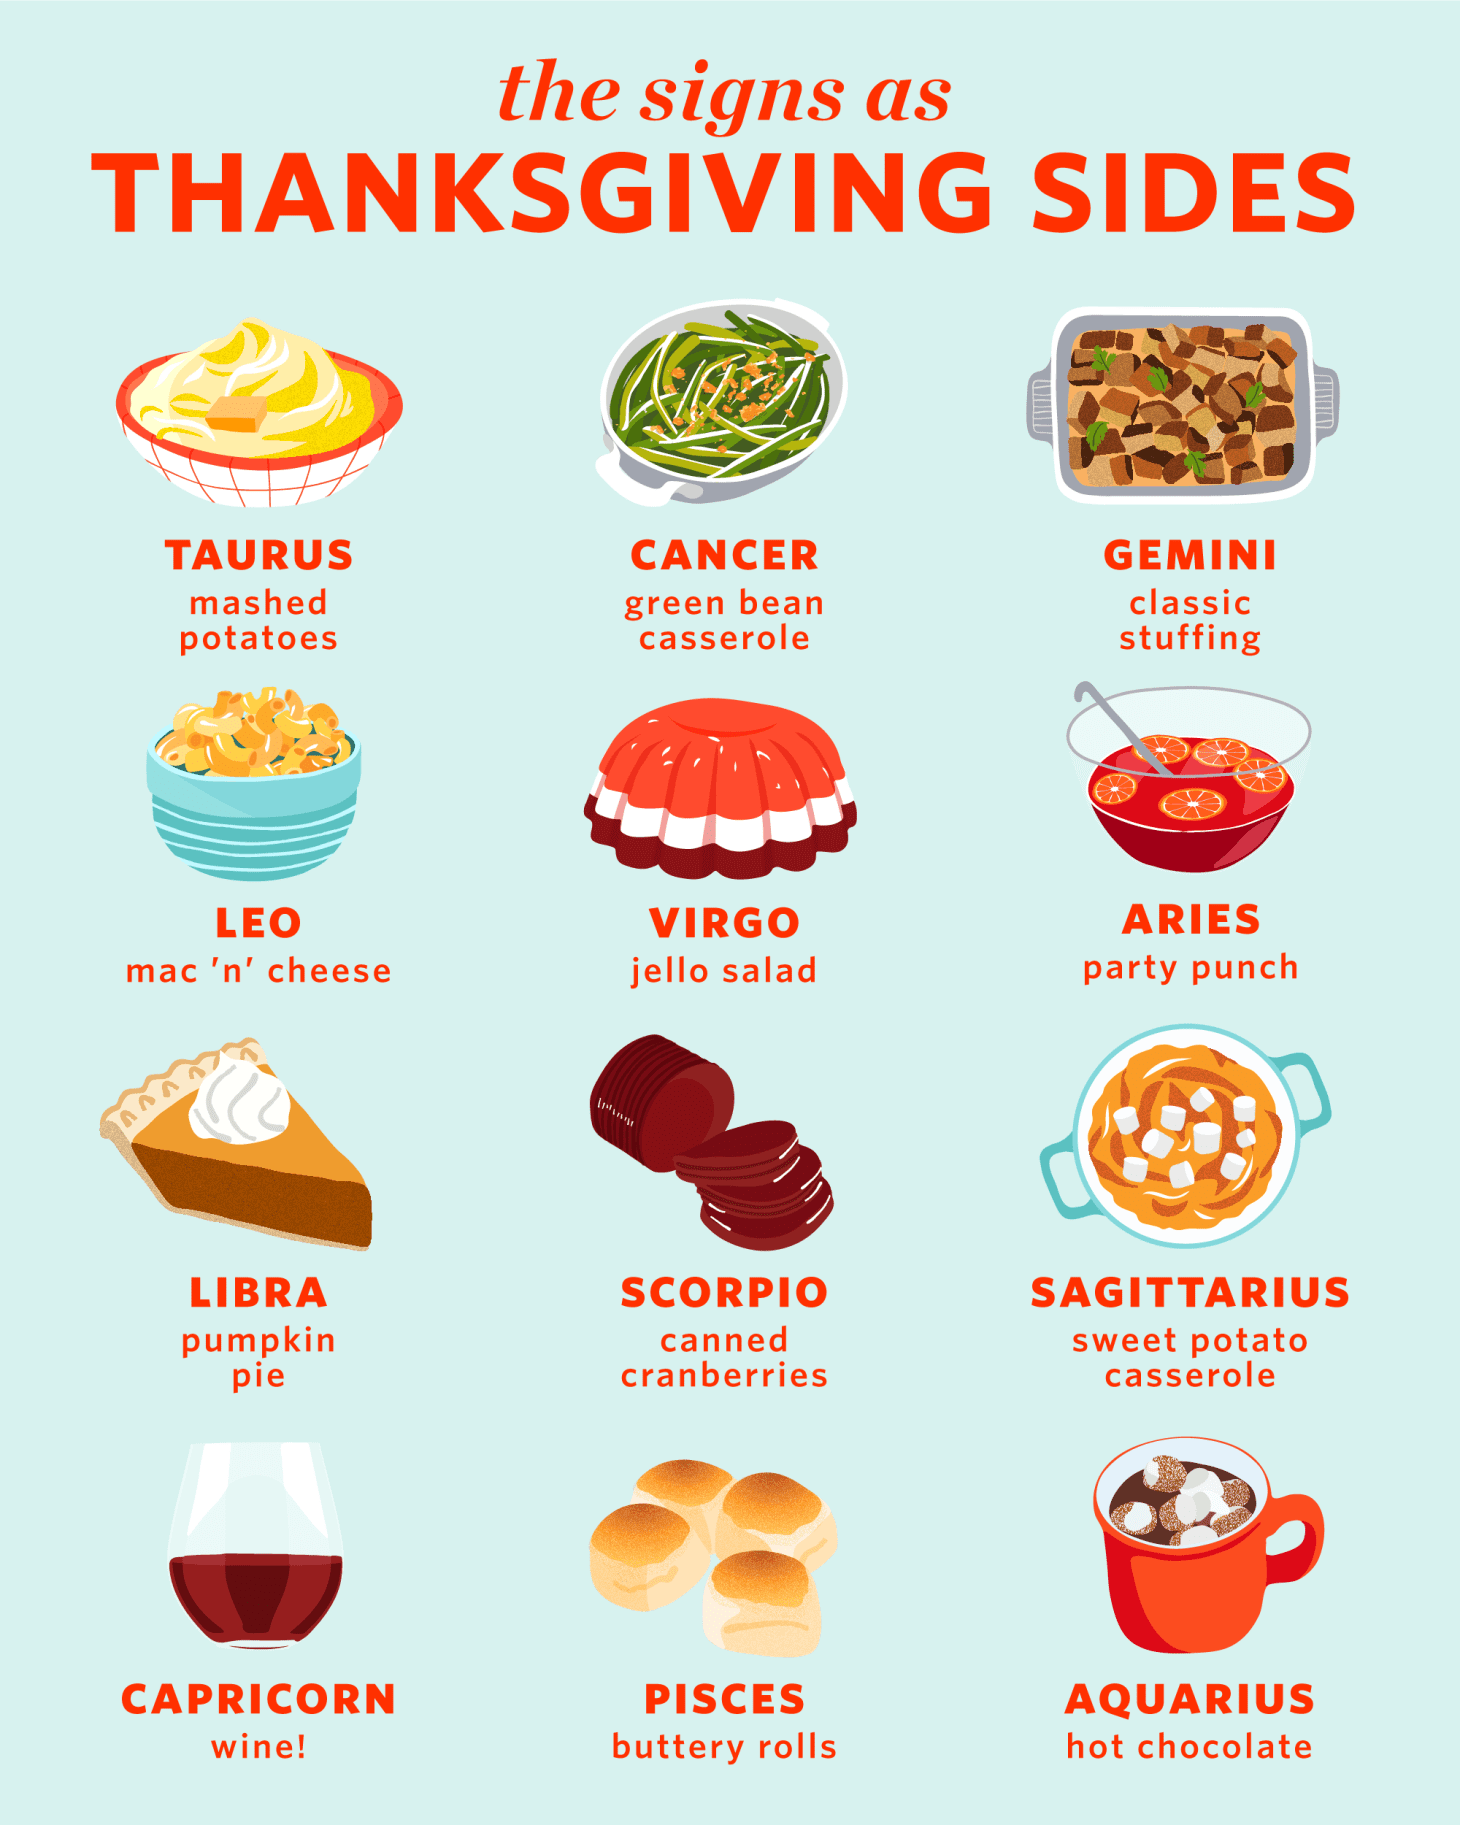 The Zodiac Signs as Thanksgiving Sides | Kitchn